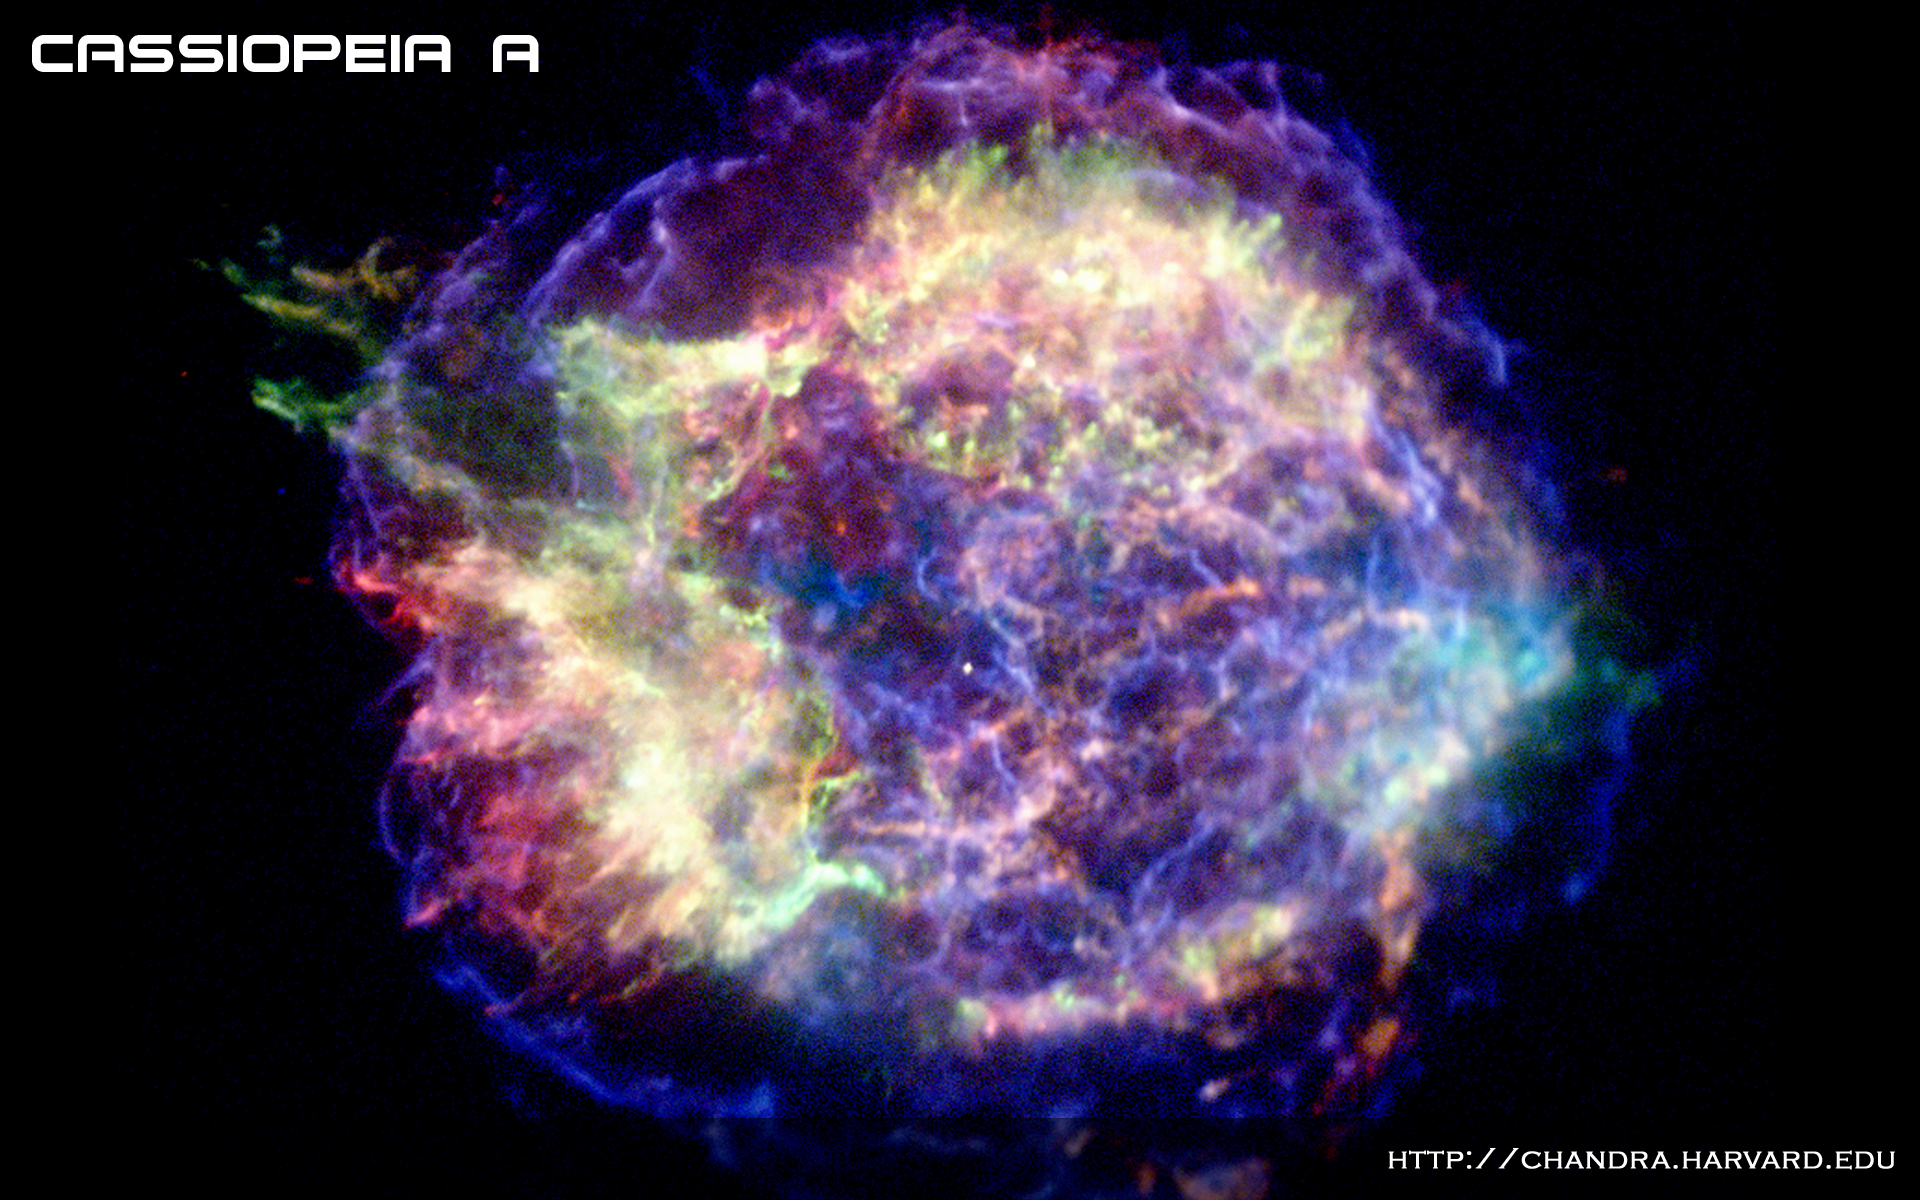 Cassiopeia A [photo Album] - 1 Mb Image Download , HD Wallpaper & Backgrounds